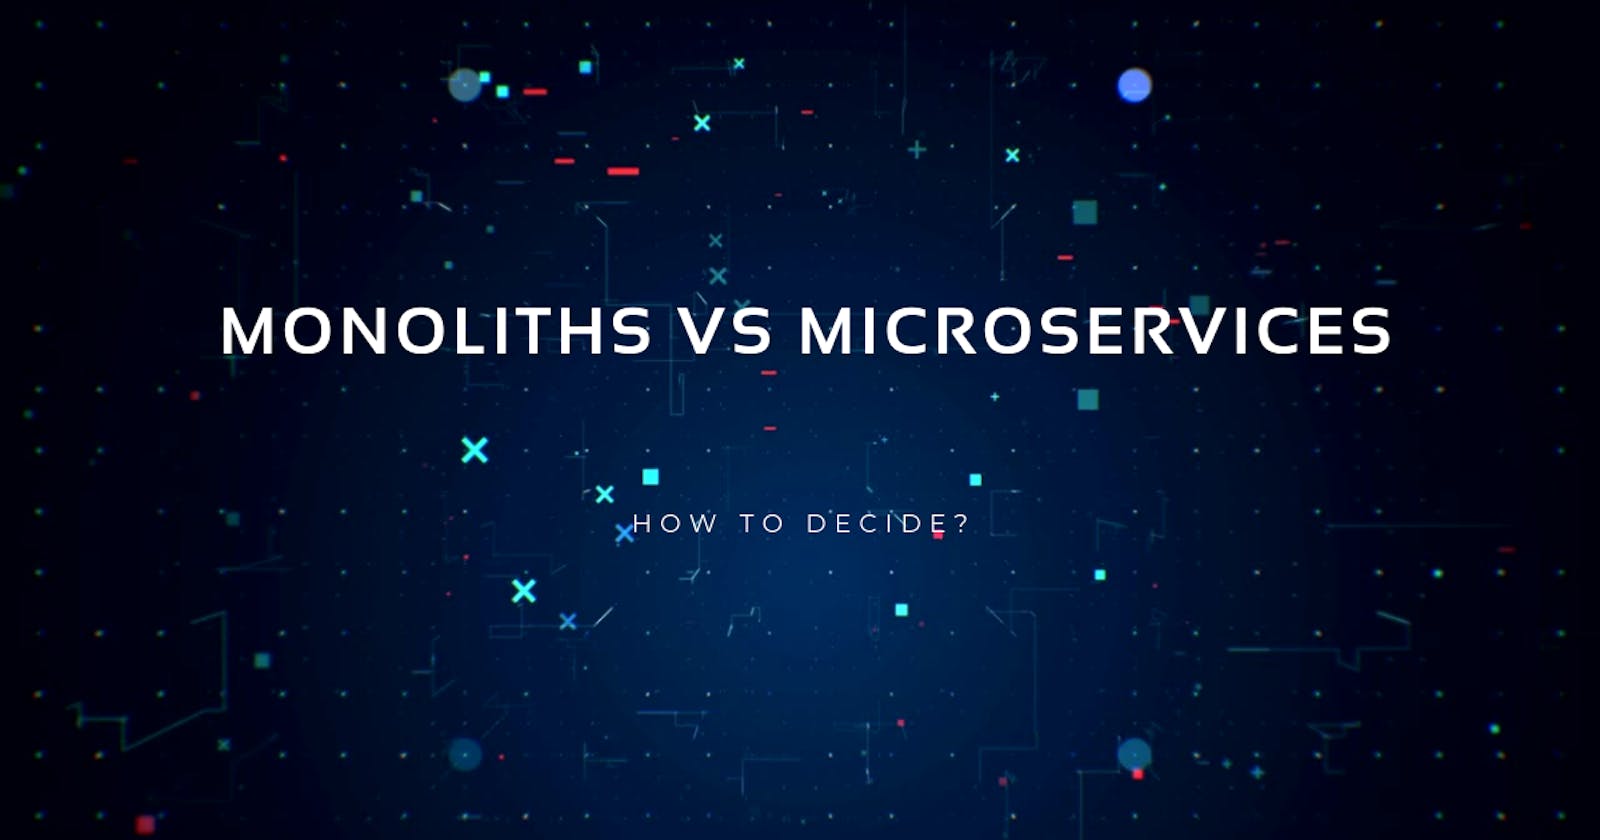 How to decide between monoliths and microservices architecture?